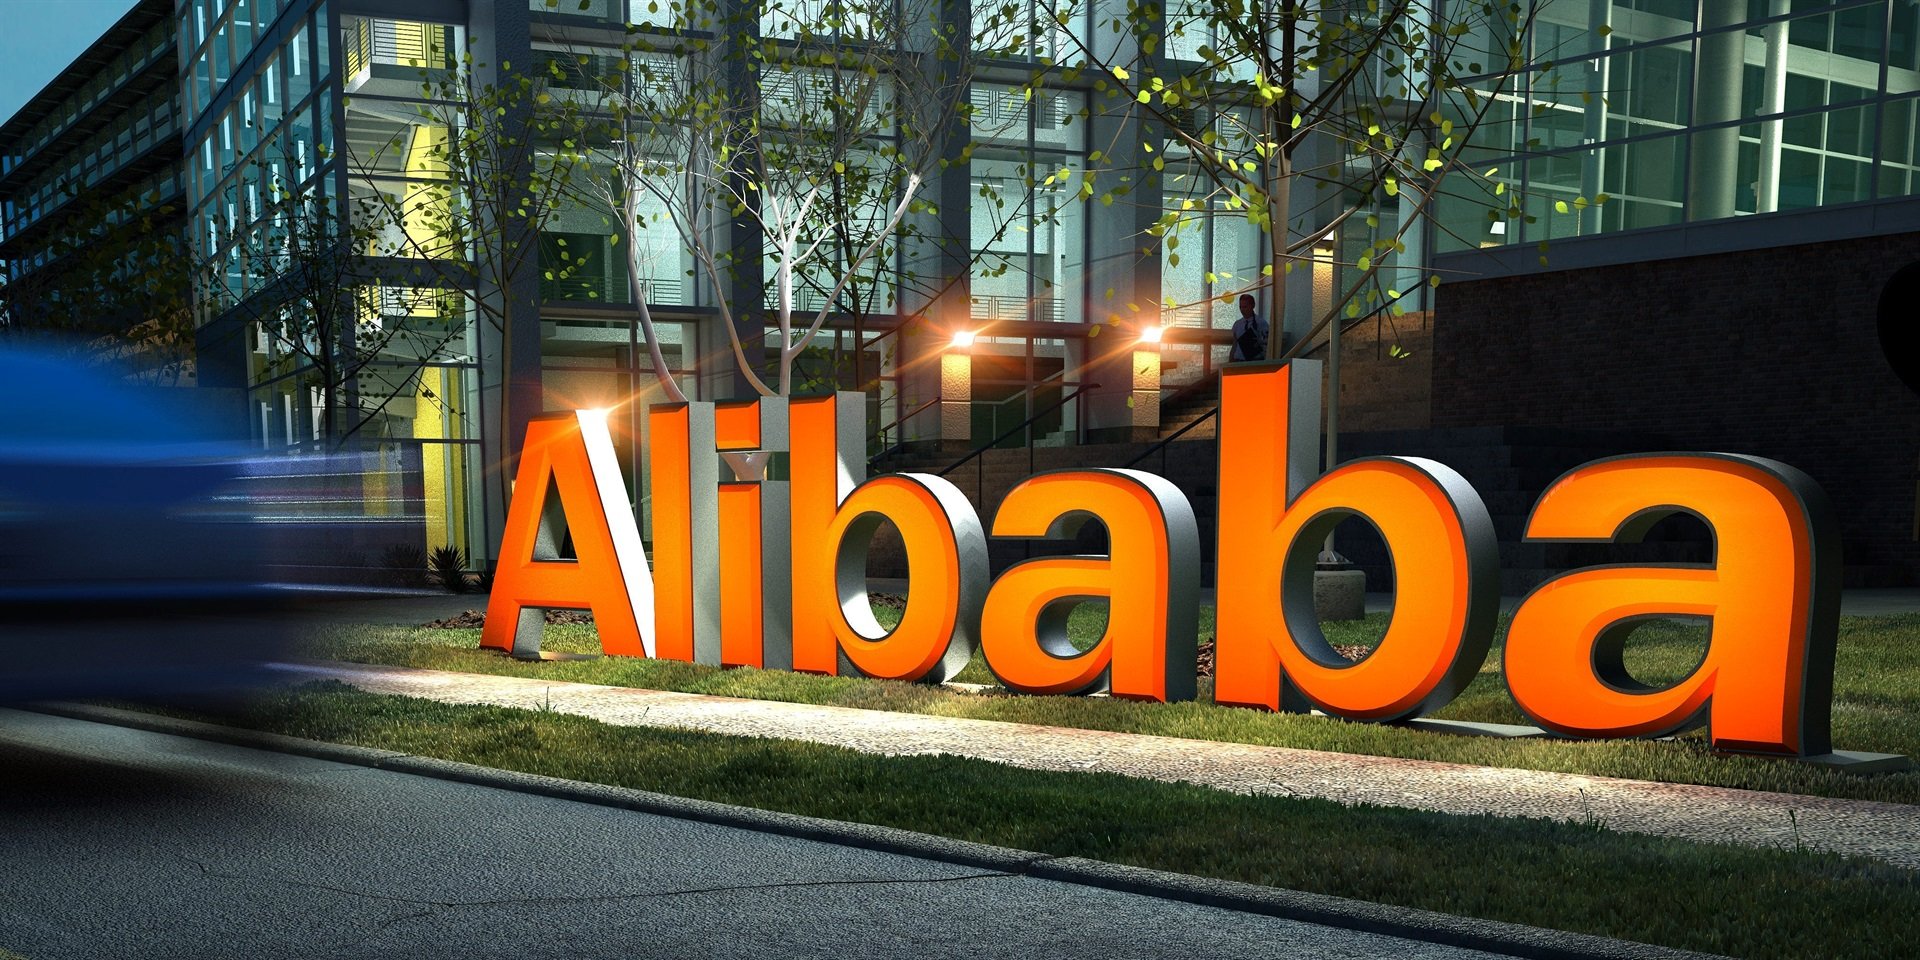 Alibaba has lost R5 trillion in world's biggest wipeout | Business